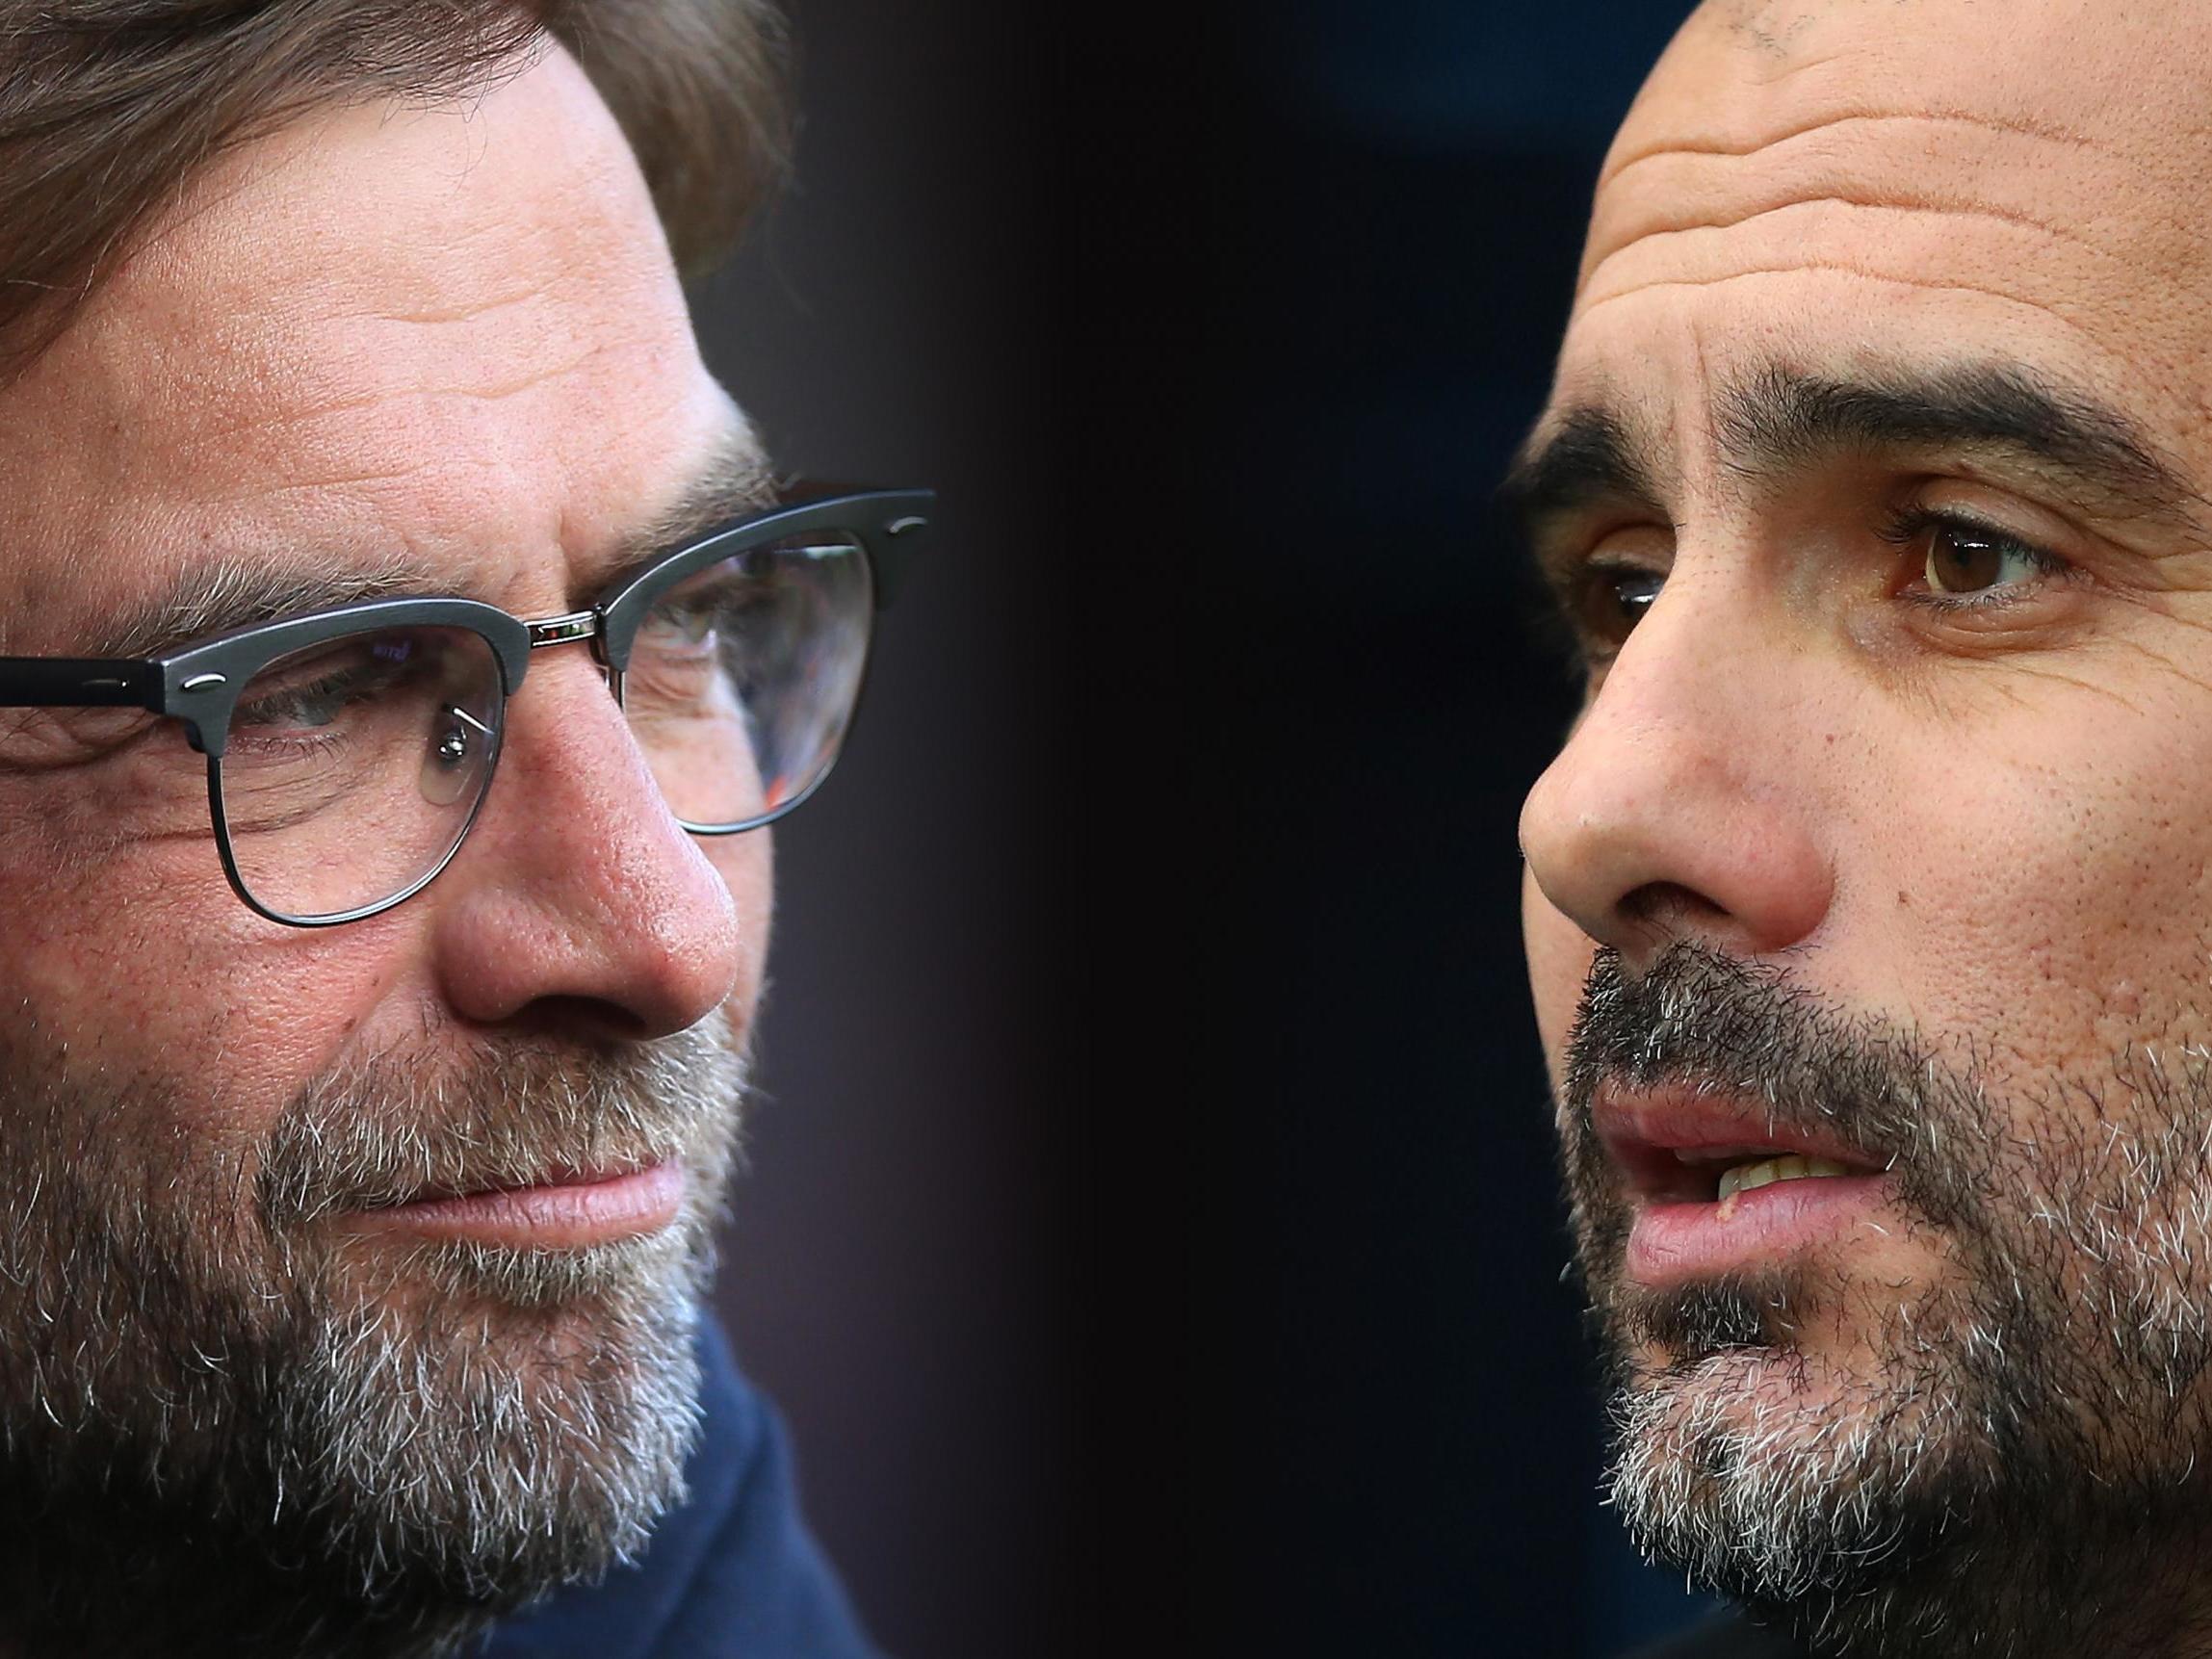 Both Jurgen Klopp and Pep Guardiola have left their mark on the game